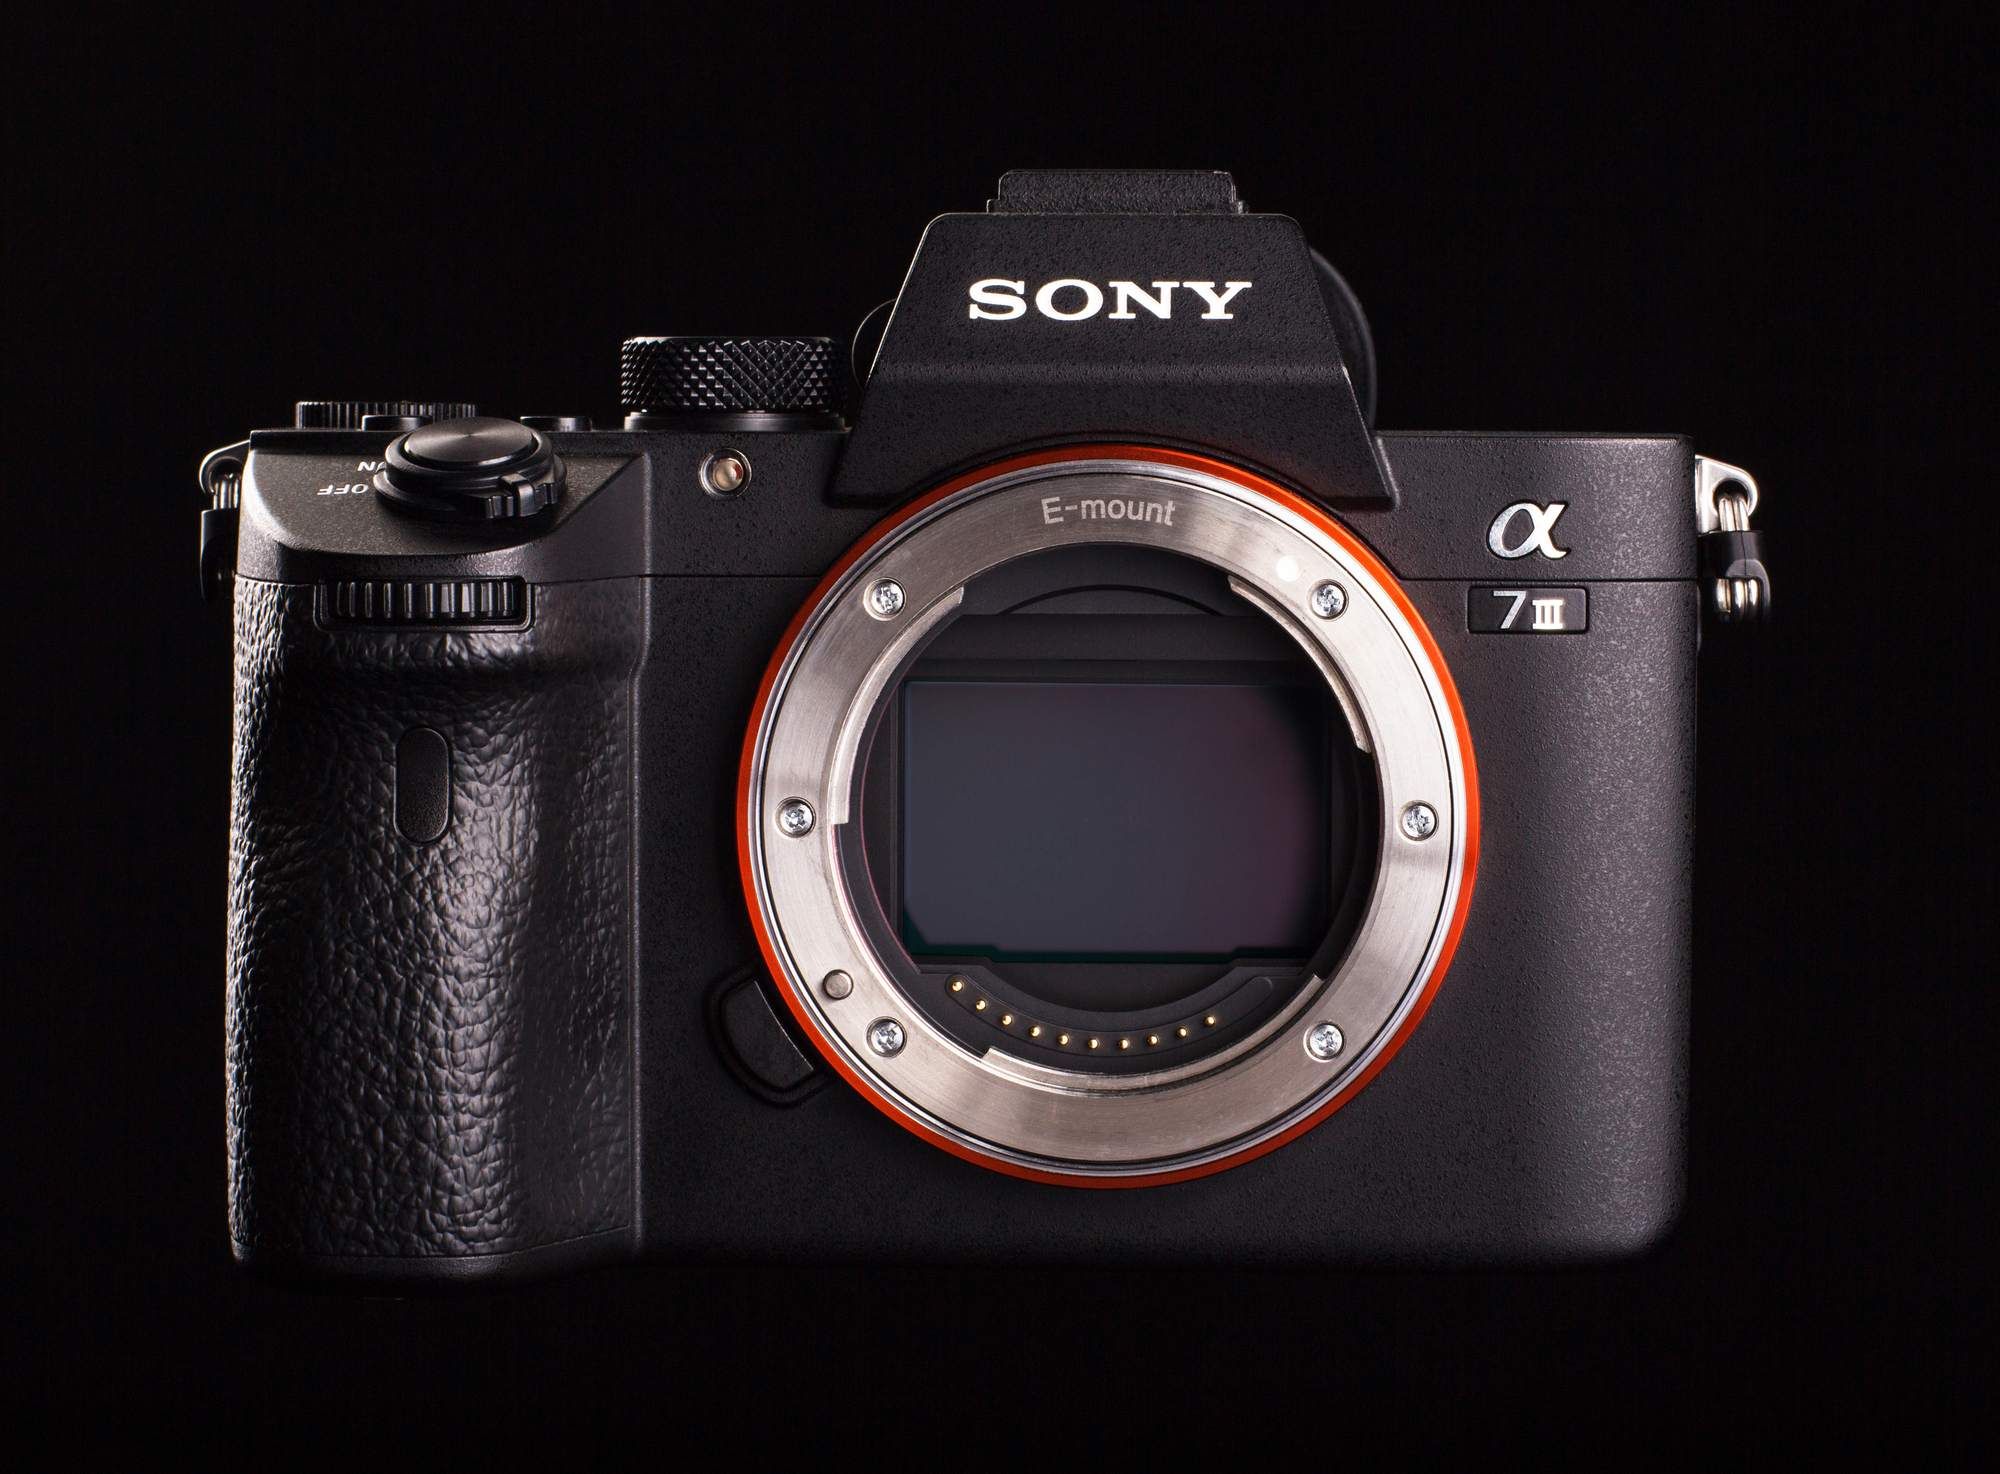 Sony is facing a class action lawsuit over a camera that allegedly doesn't work properly.